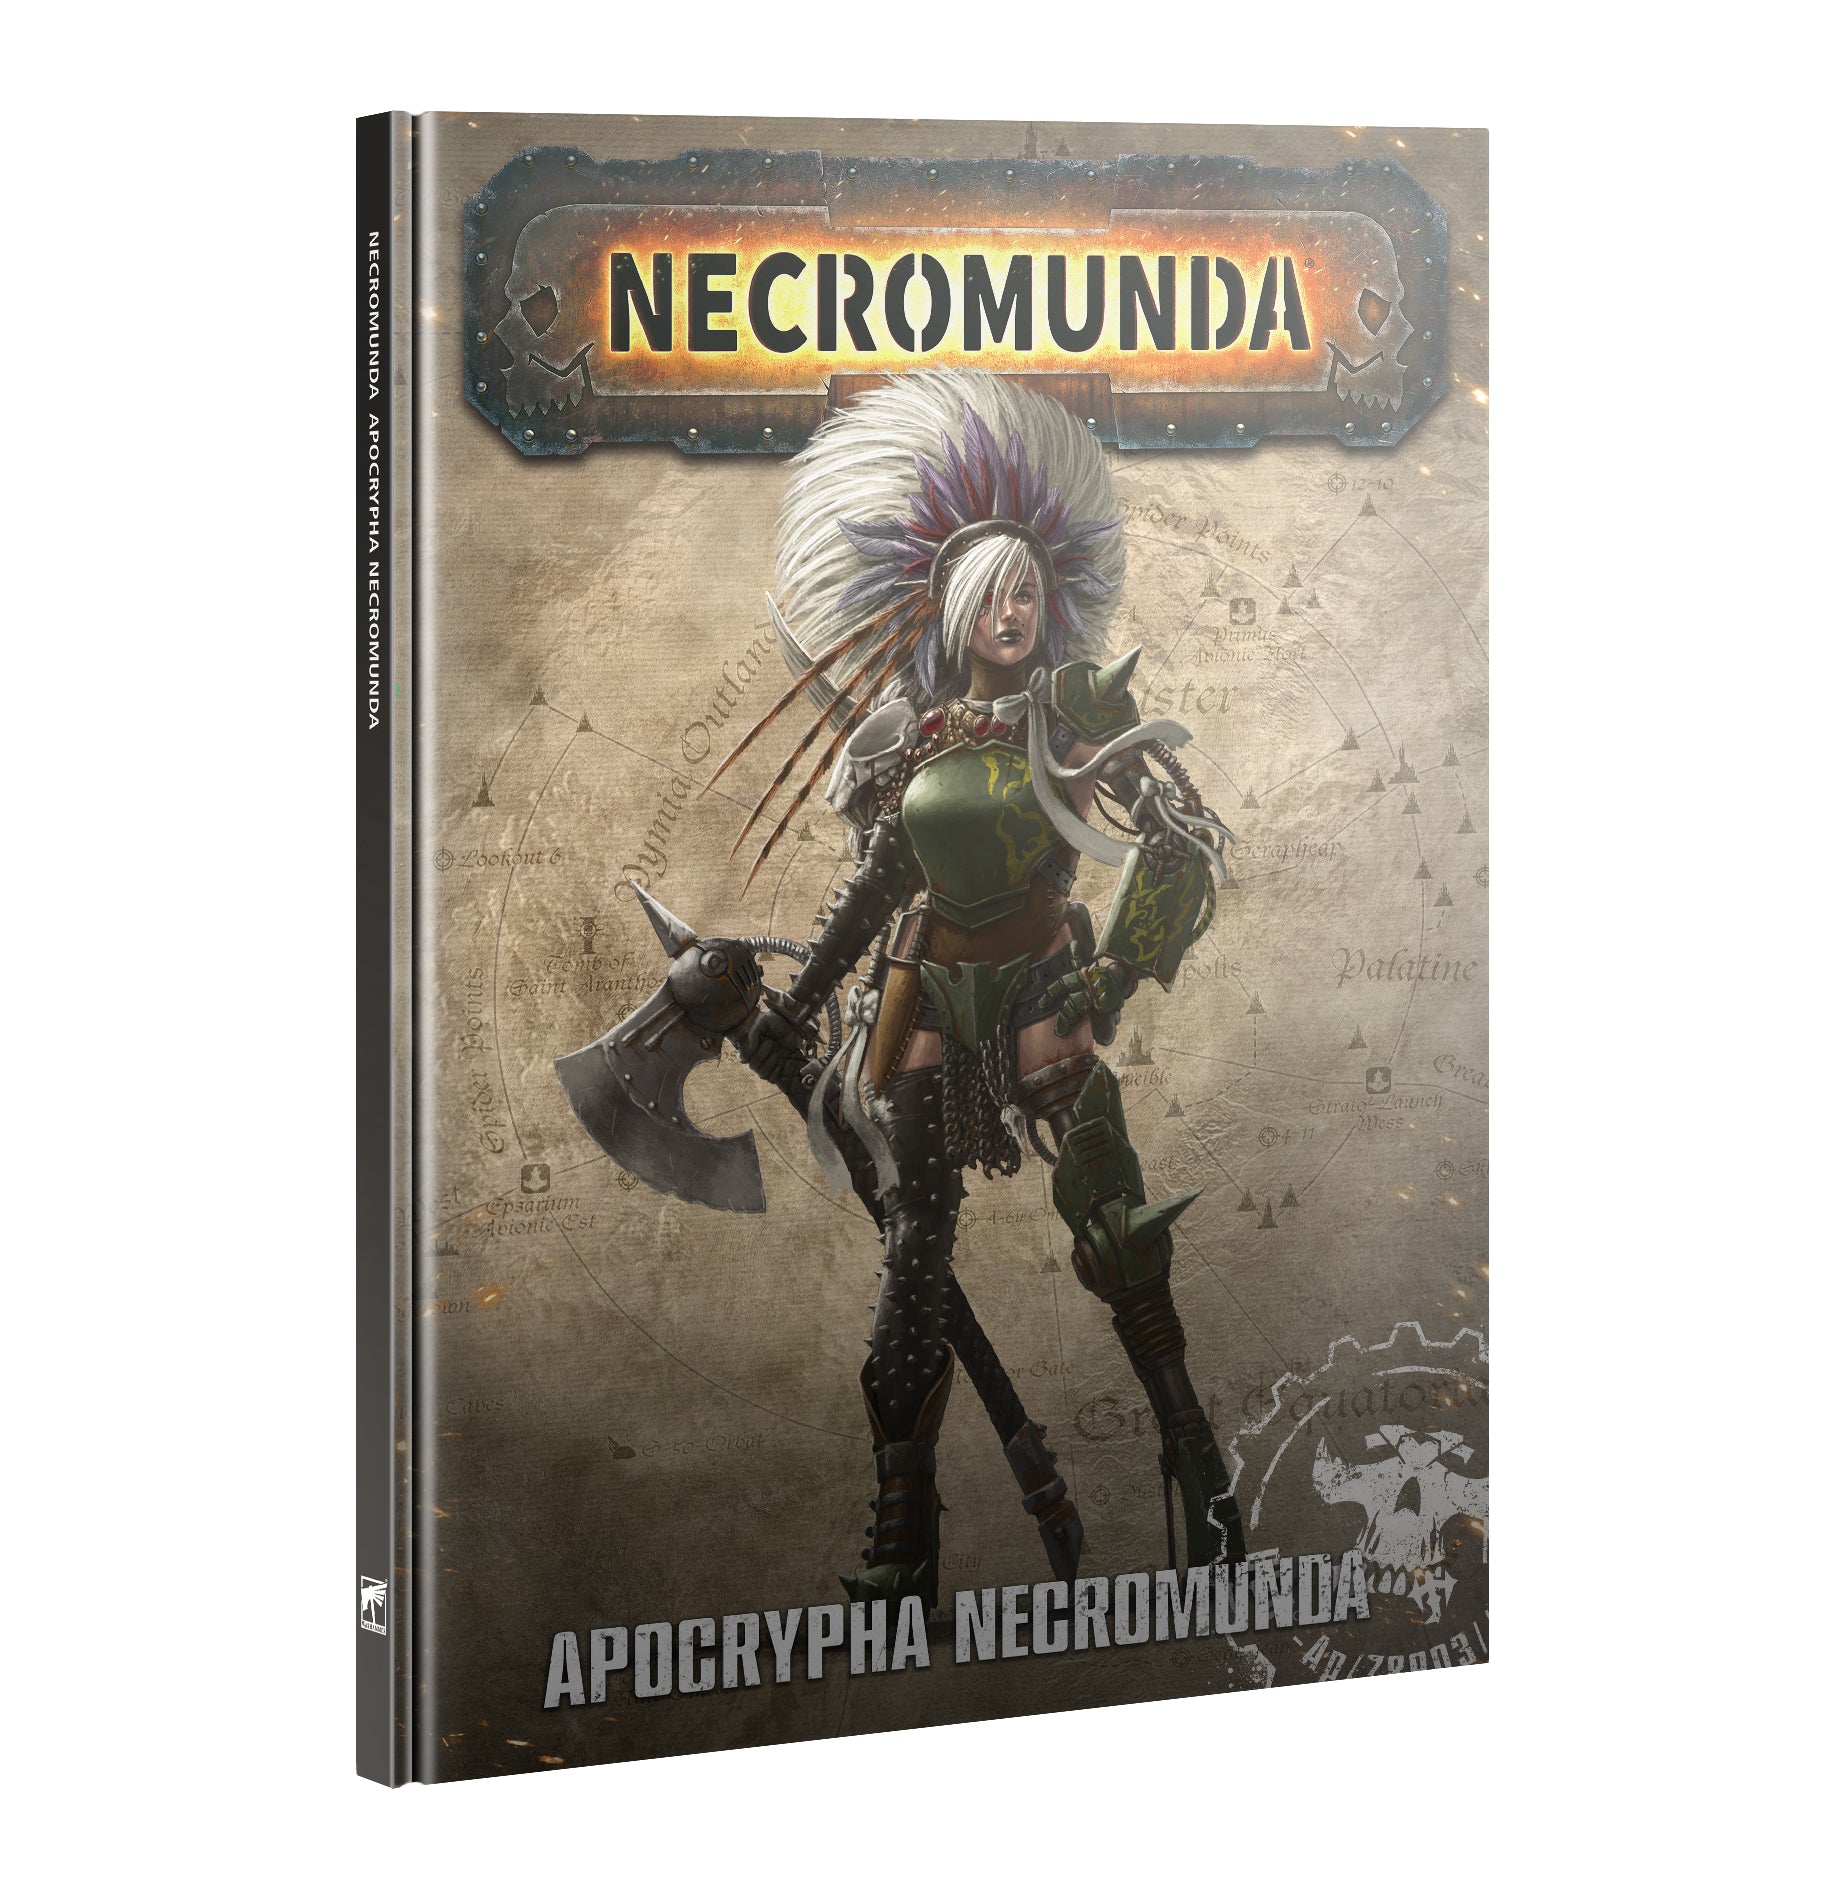 NECROMUNDA: APOCRYPHA NECROMUNDA Necromunda Games Workshop    | Red Claw Gaming